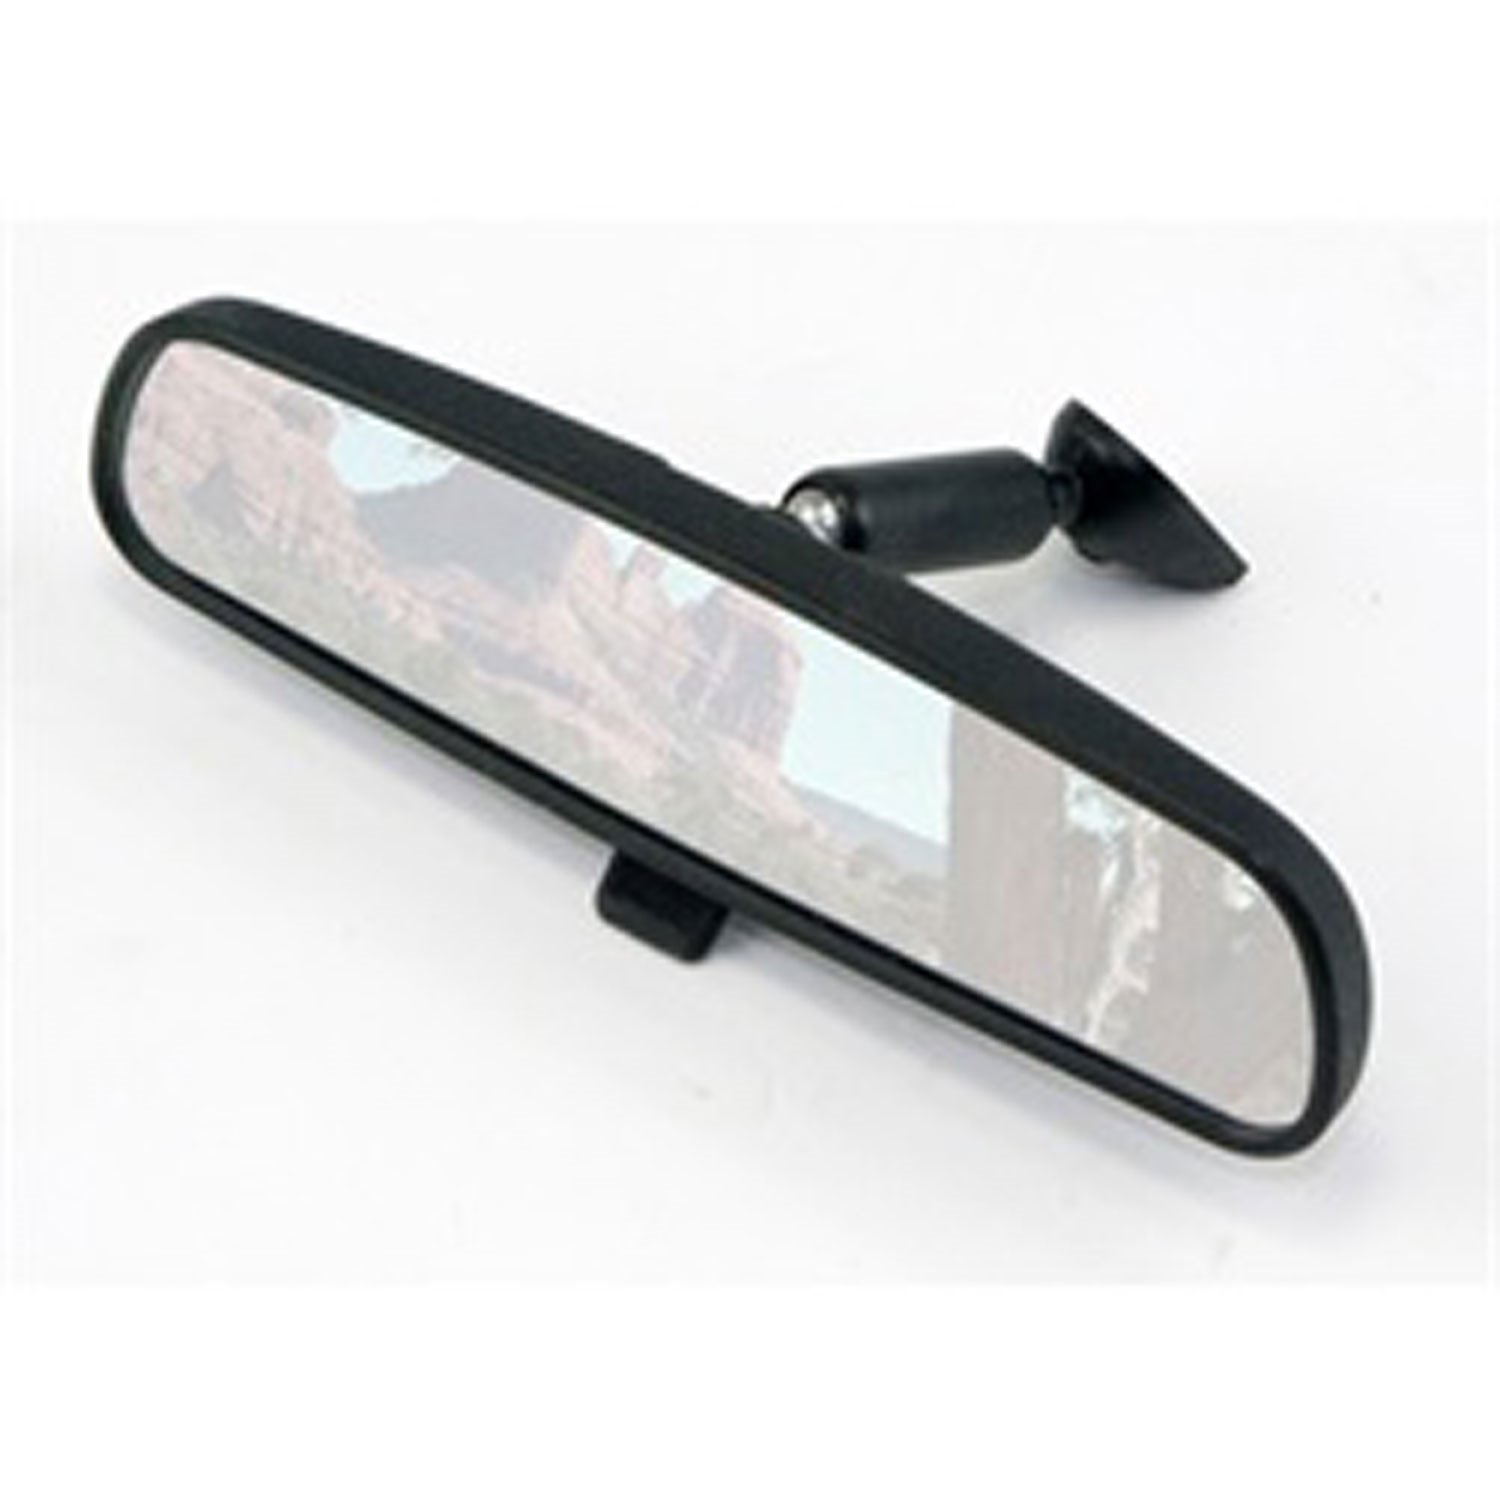 universal replacement rear view mirror from Omix-ADA attaches to button already on your windshield.